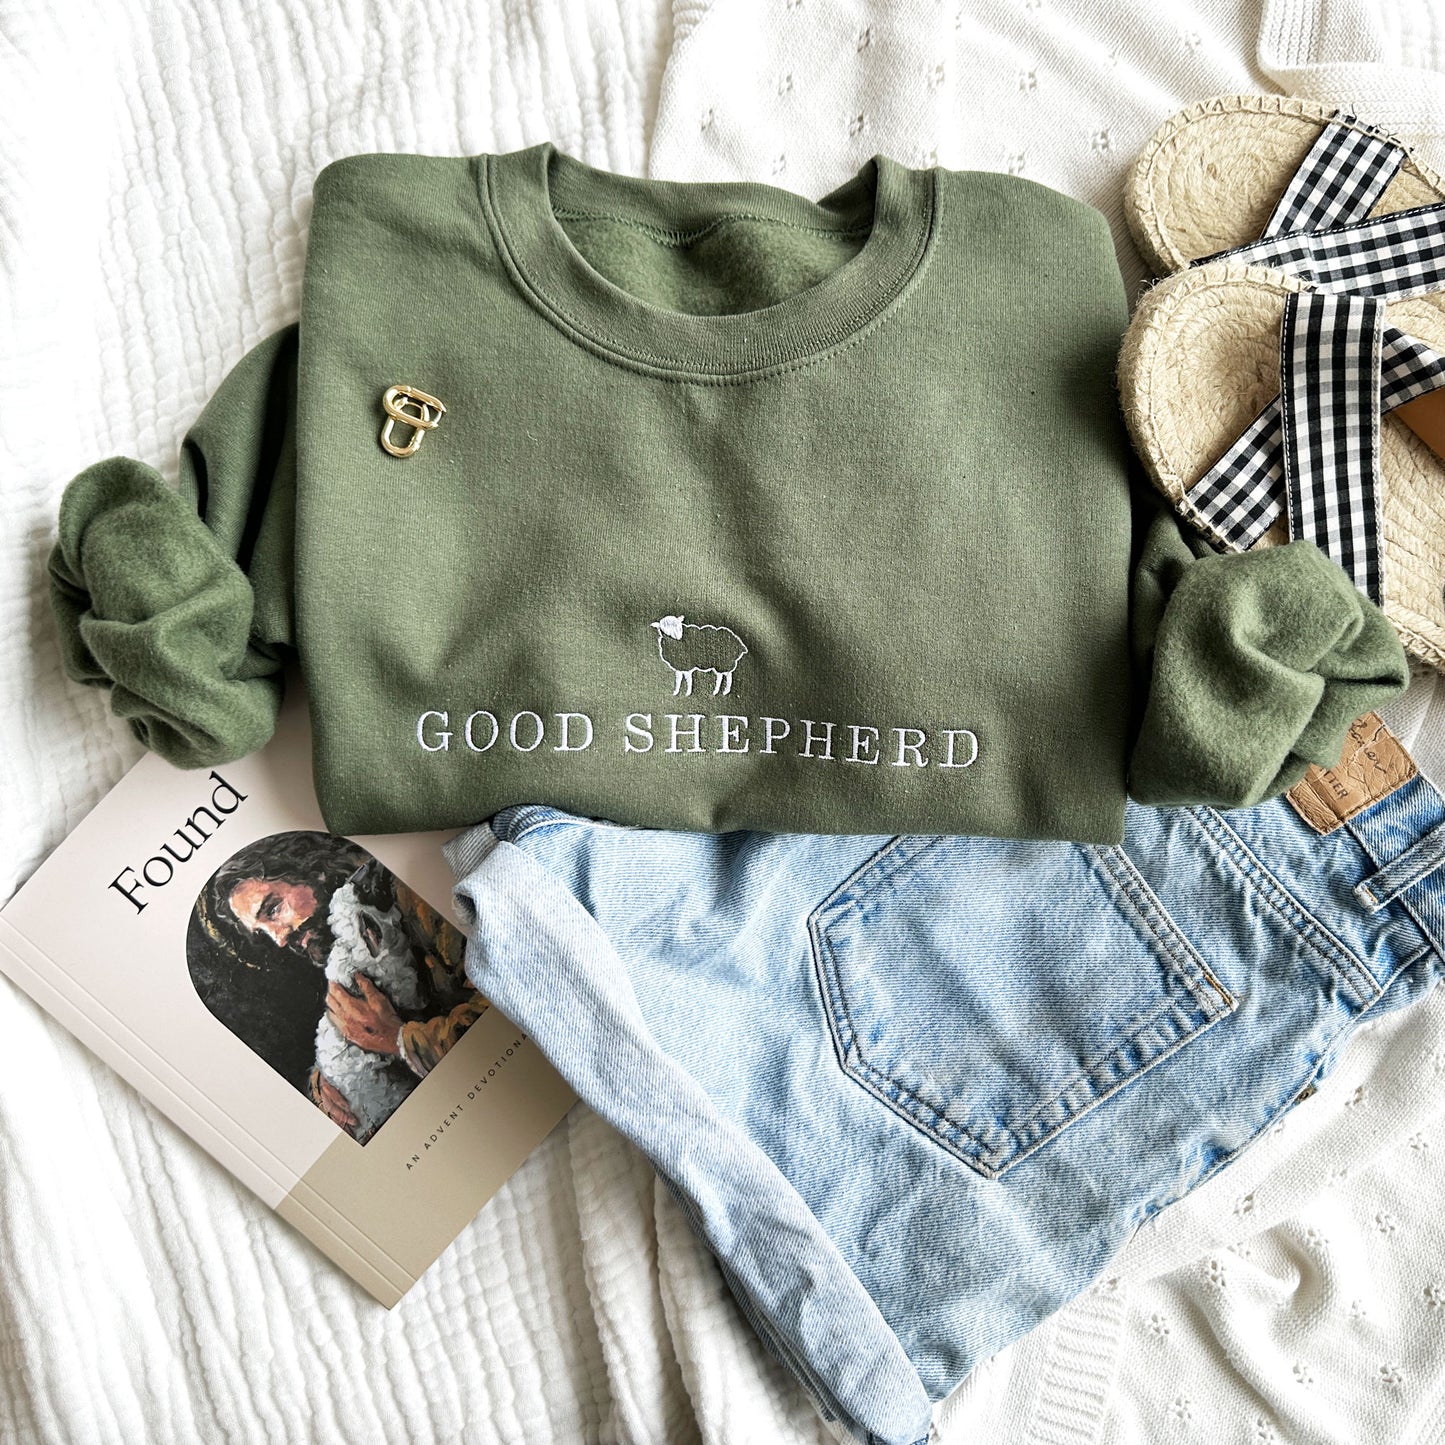 Styled flat lay of jeans, sandals, religious book, and olive crewneck sweatshirt. On the sweatshirt is a little sheep above the words good shepherd embroidered in white thread 